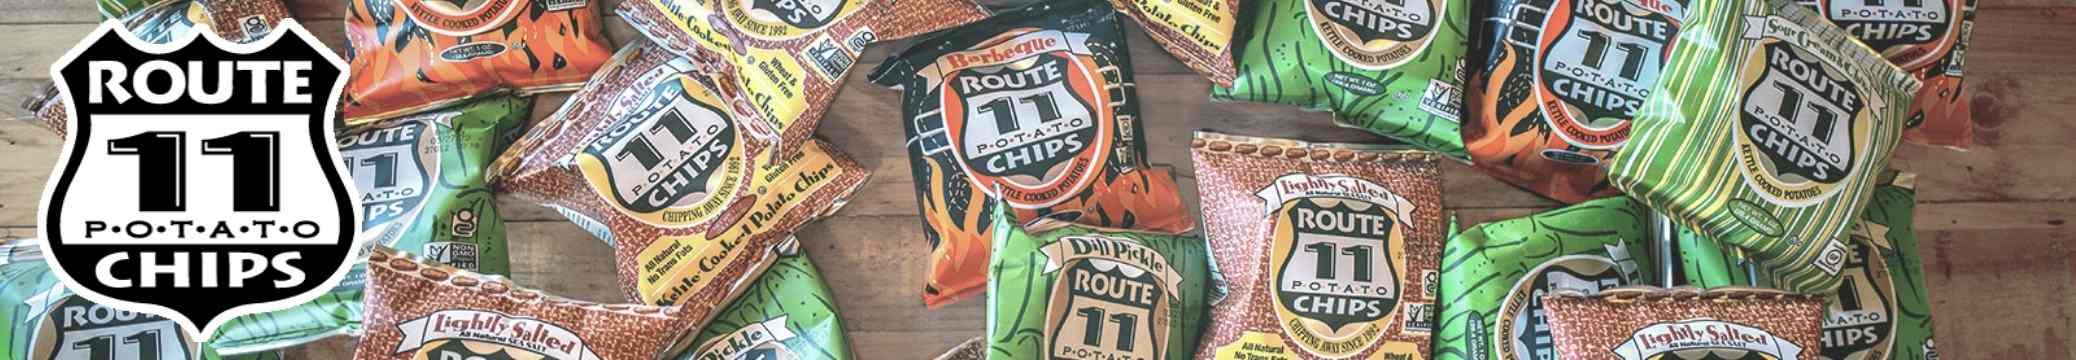 Route 11 Chips 1-2oz